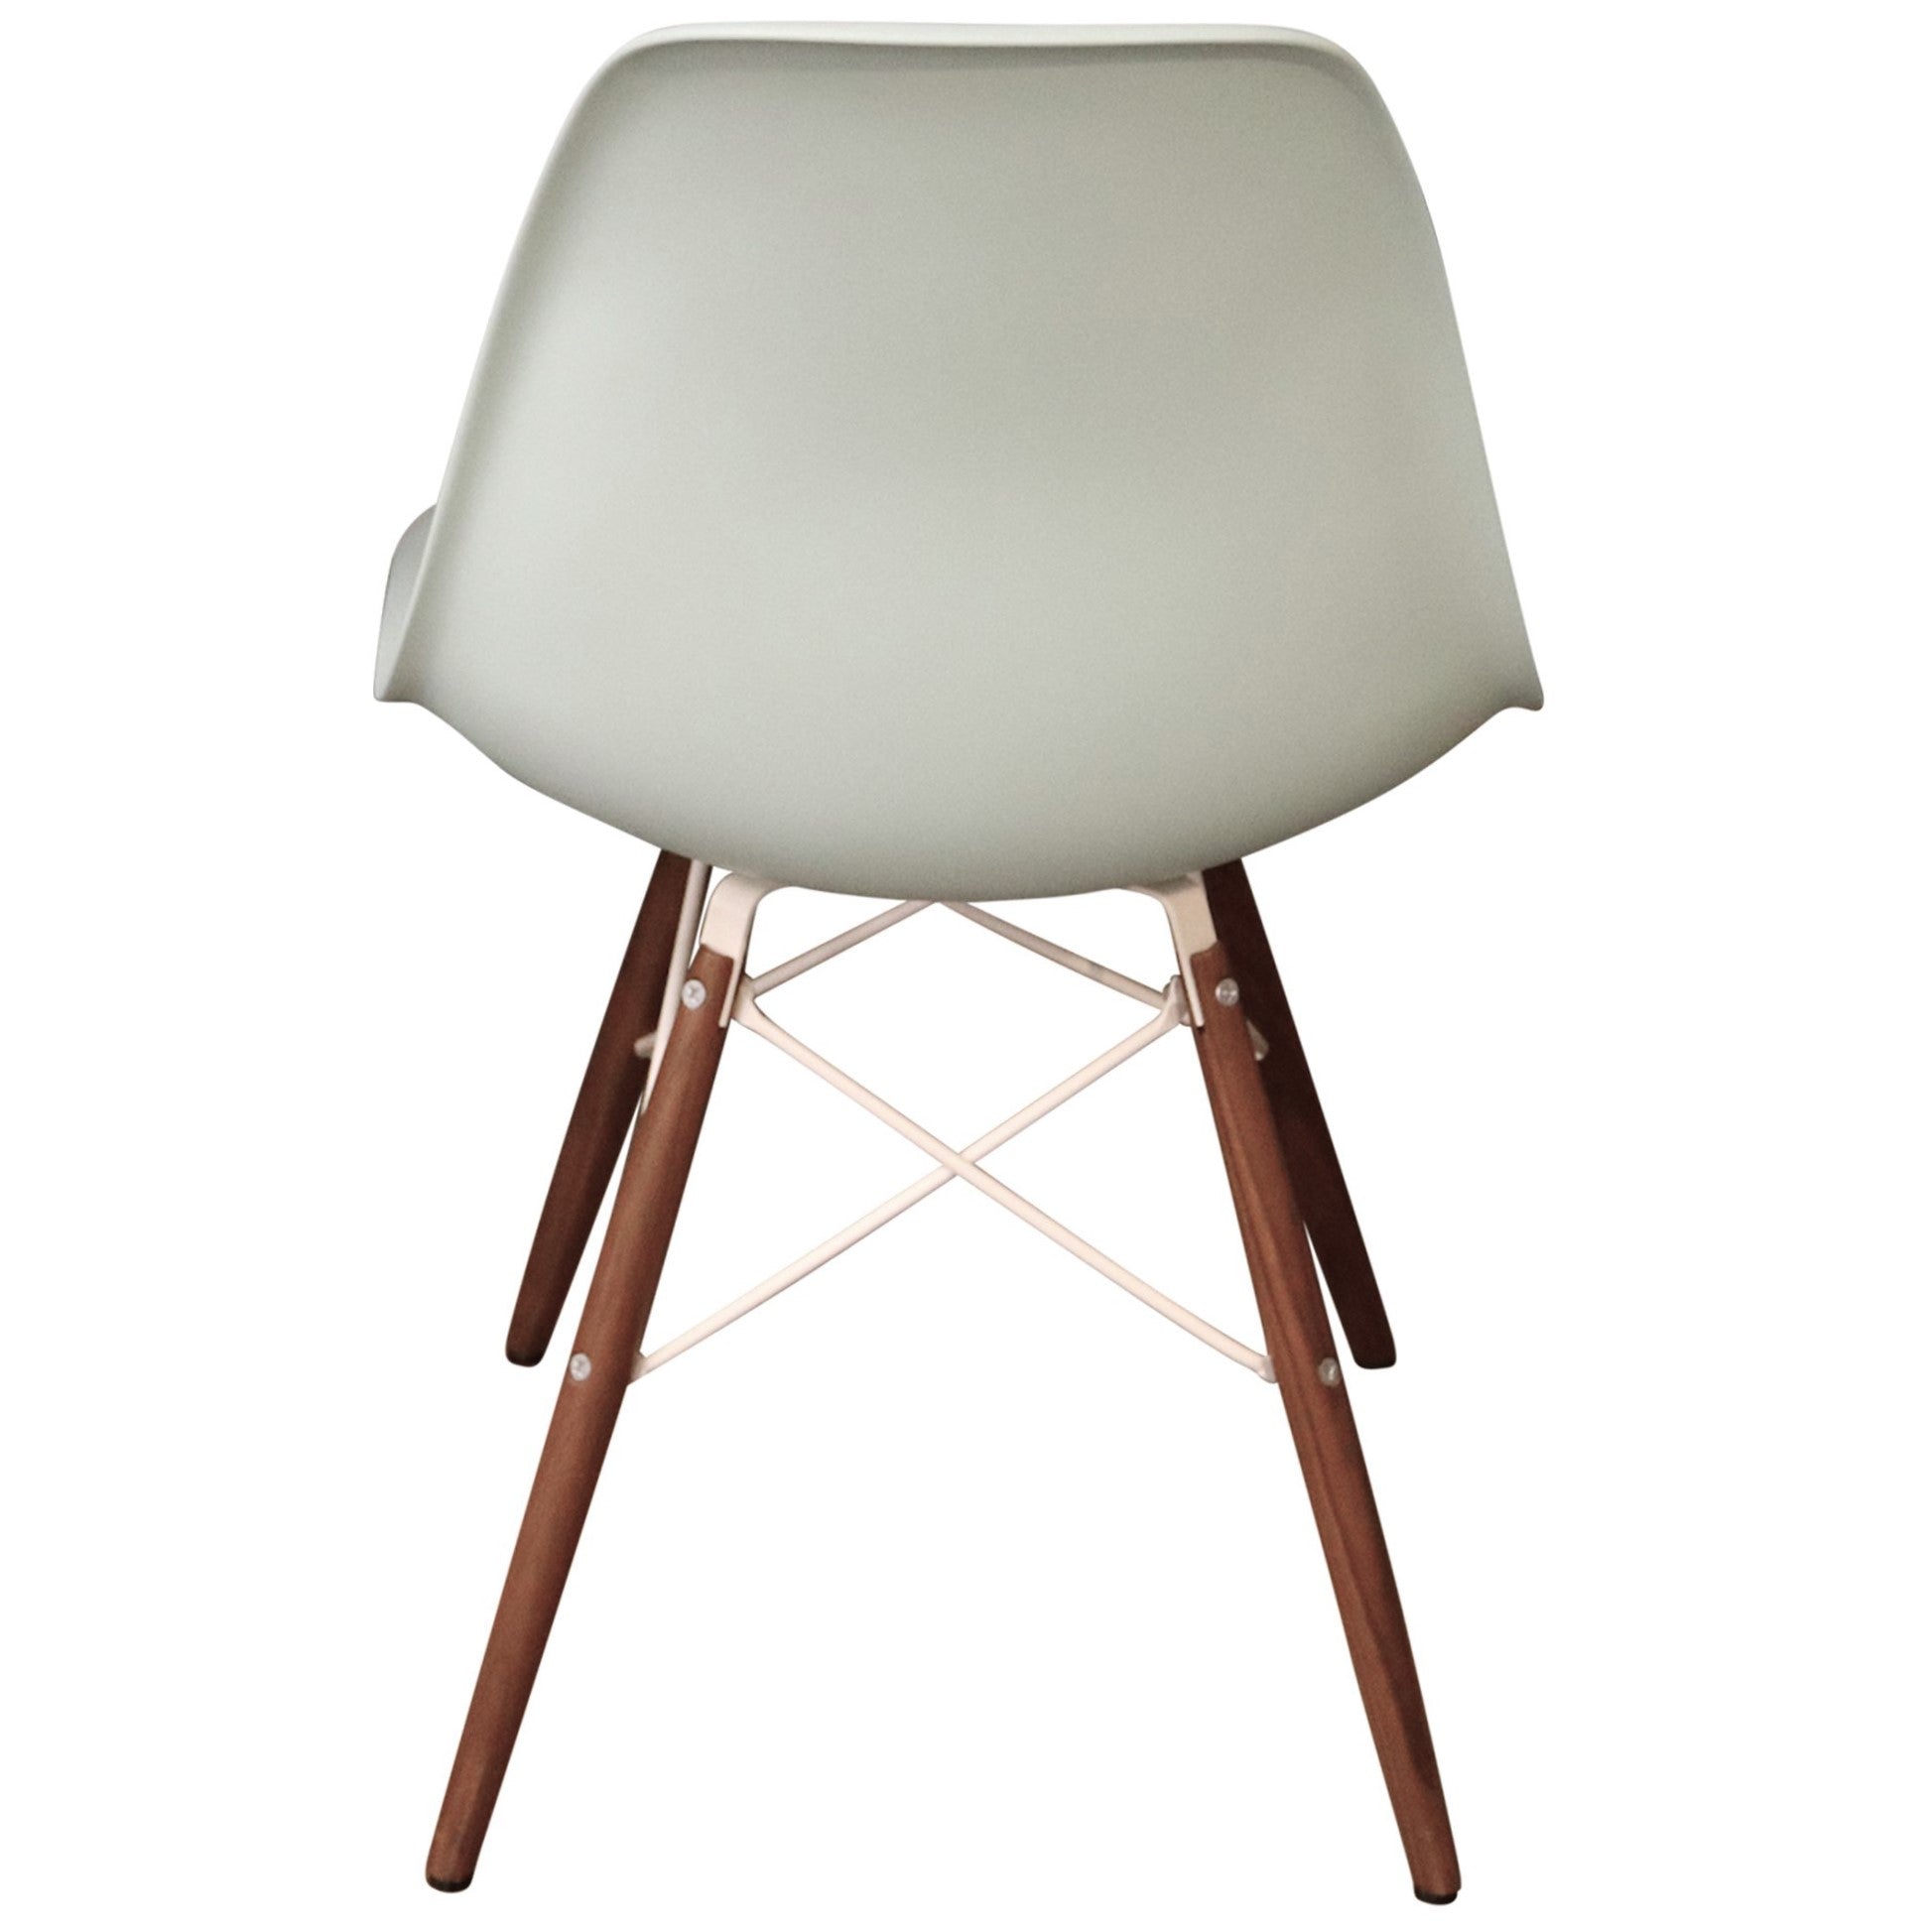 Herman Miller Eames Molded Plastic Side Chair, Grey Green - Preowned